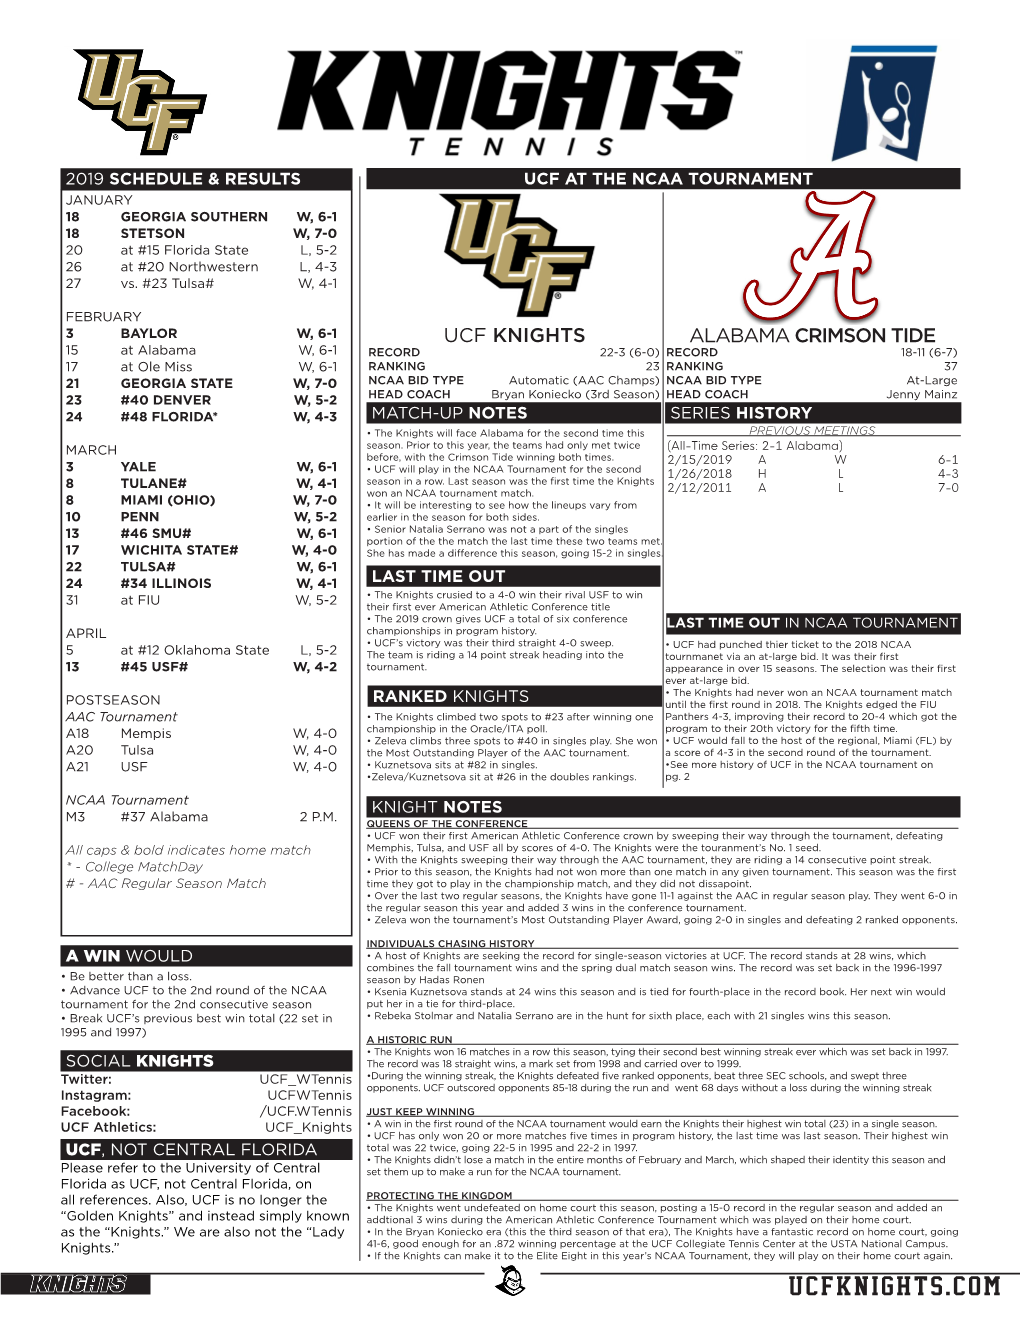 UCFKNIGHTS.COM 2019 UCF TENNIS NOTES NCAA TOURNAMENT QUICK FACTS 2019 ALPHABETICAL ROSTER GENERAL INFORMATION School Name: University of Central Florida Name Ht